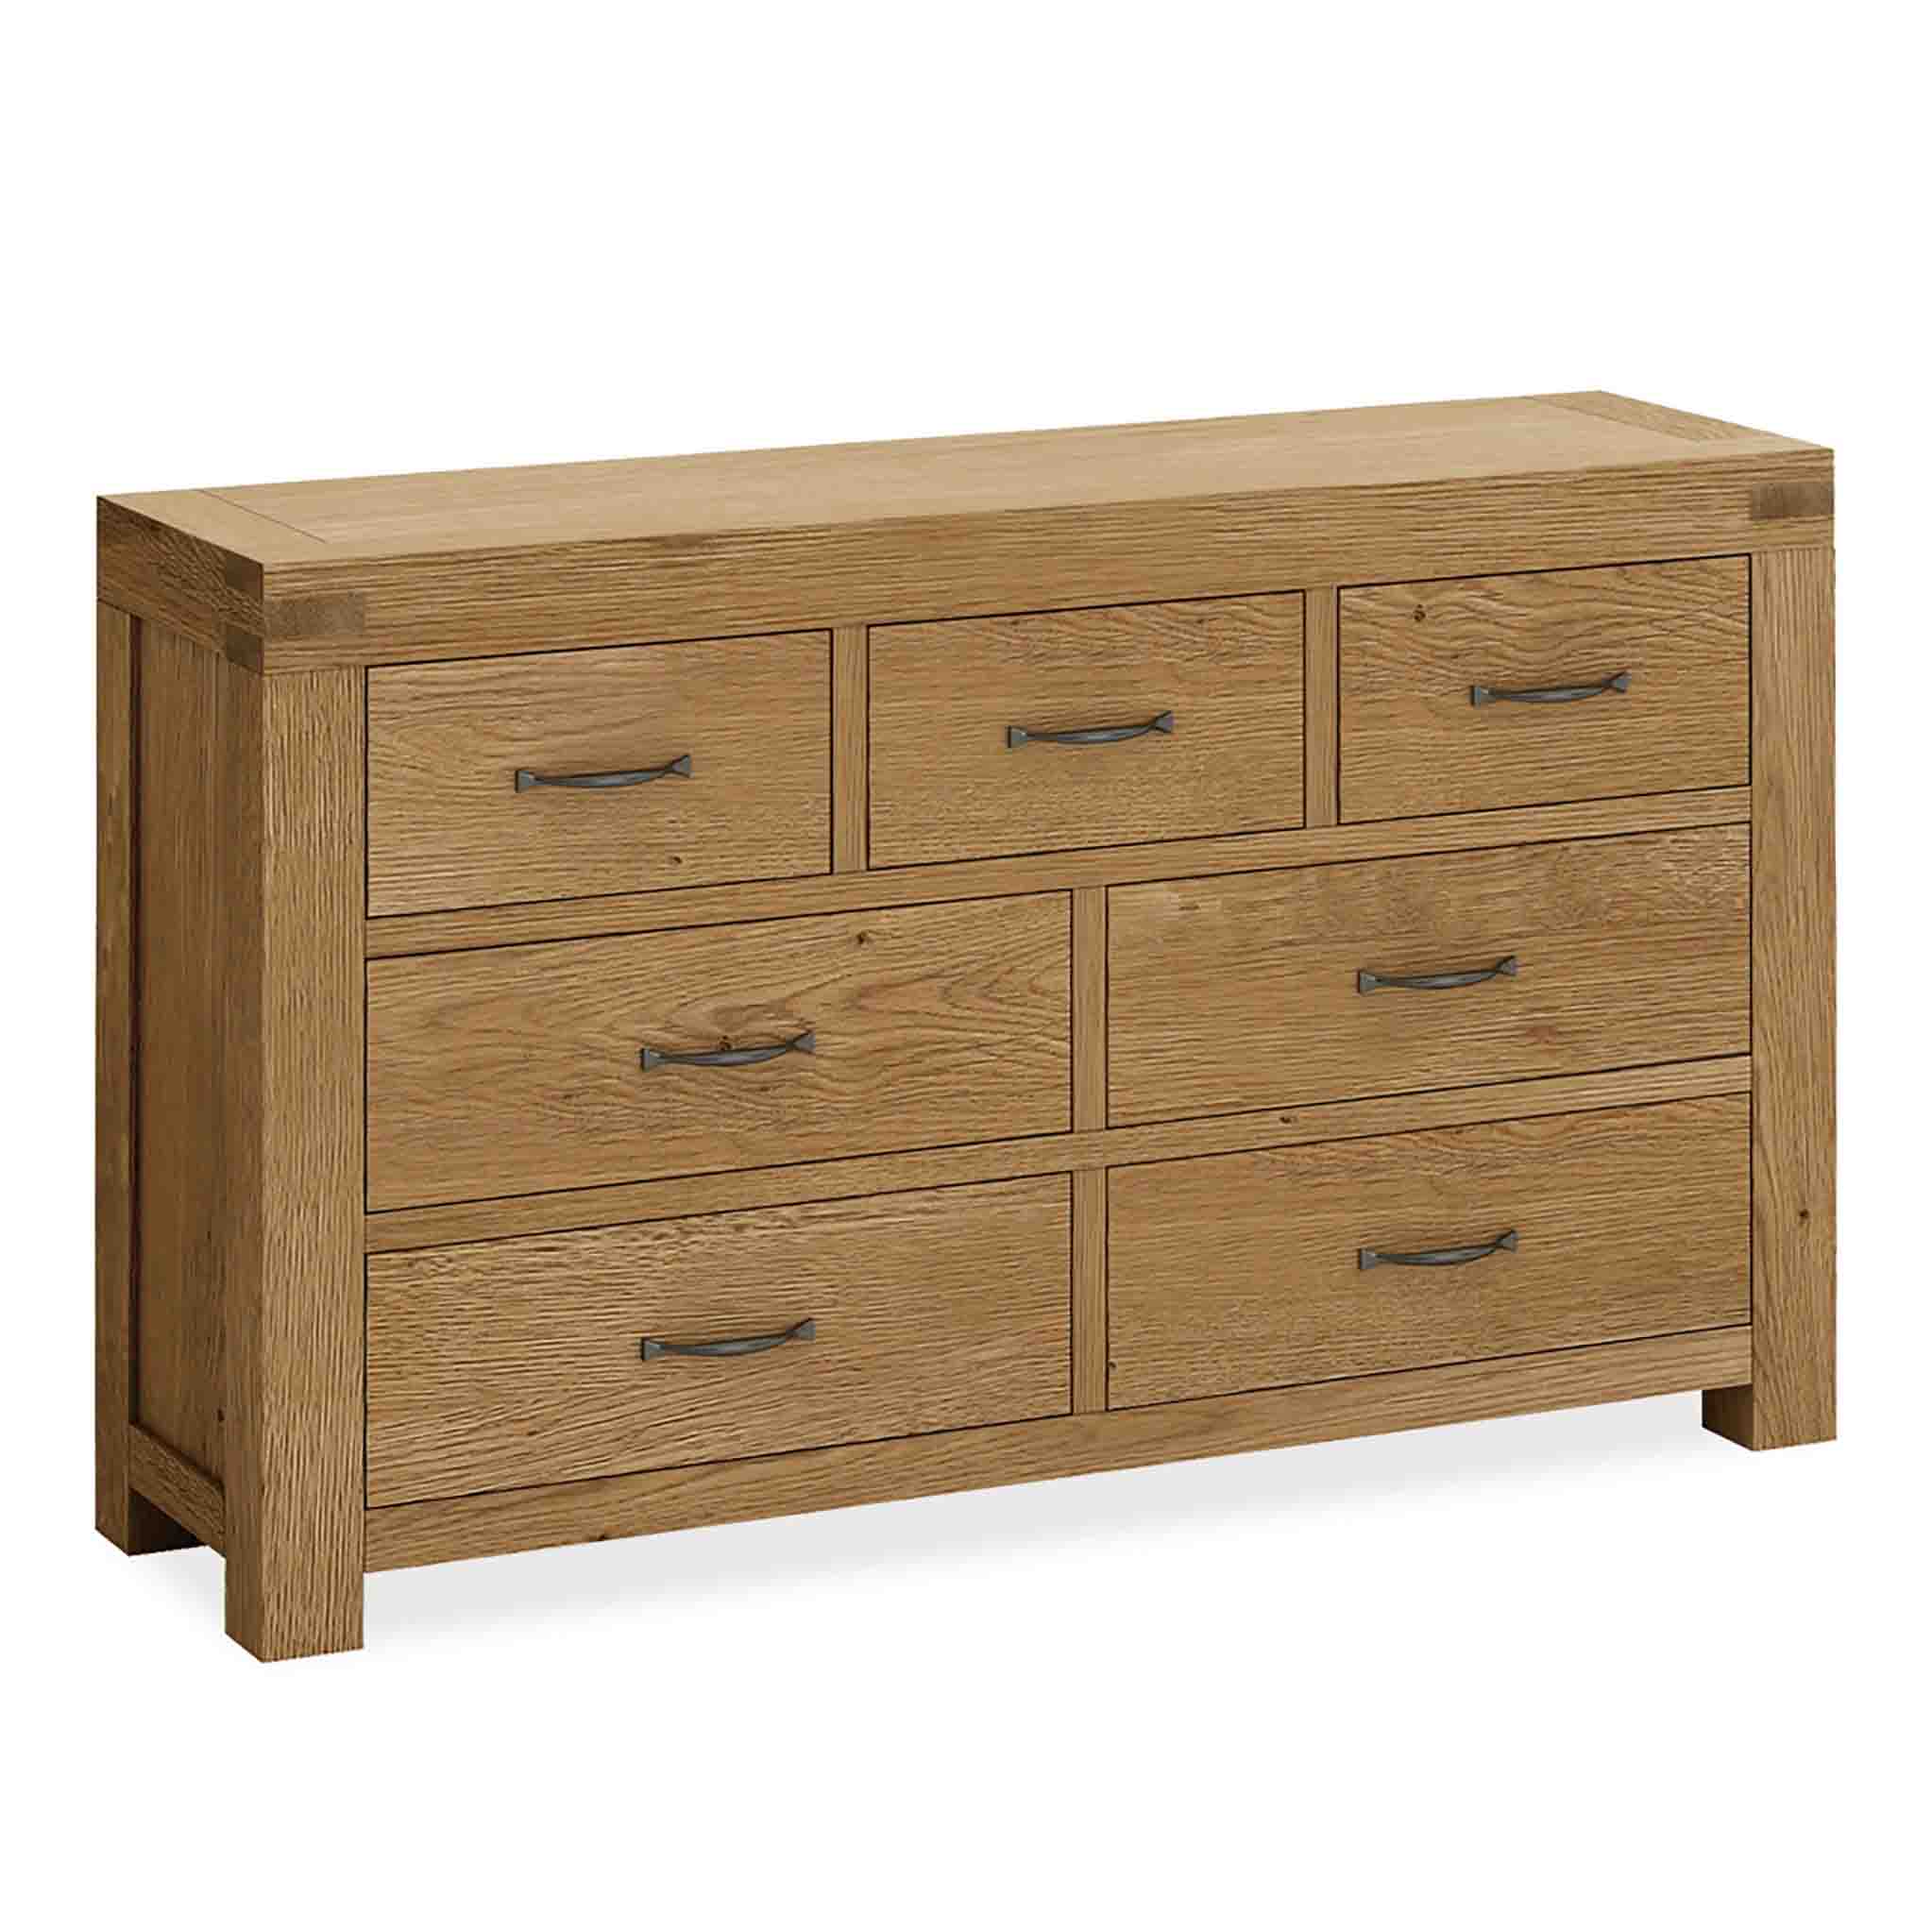 Abbey Grande Large Chest Of Drawers 7 Drawer Solid Wood Waxed Oak